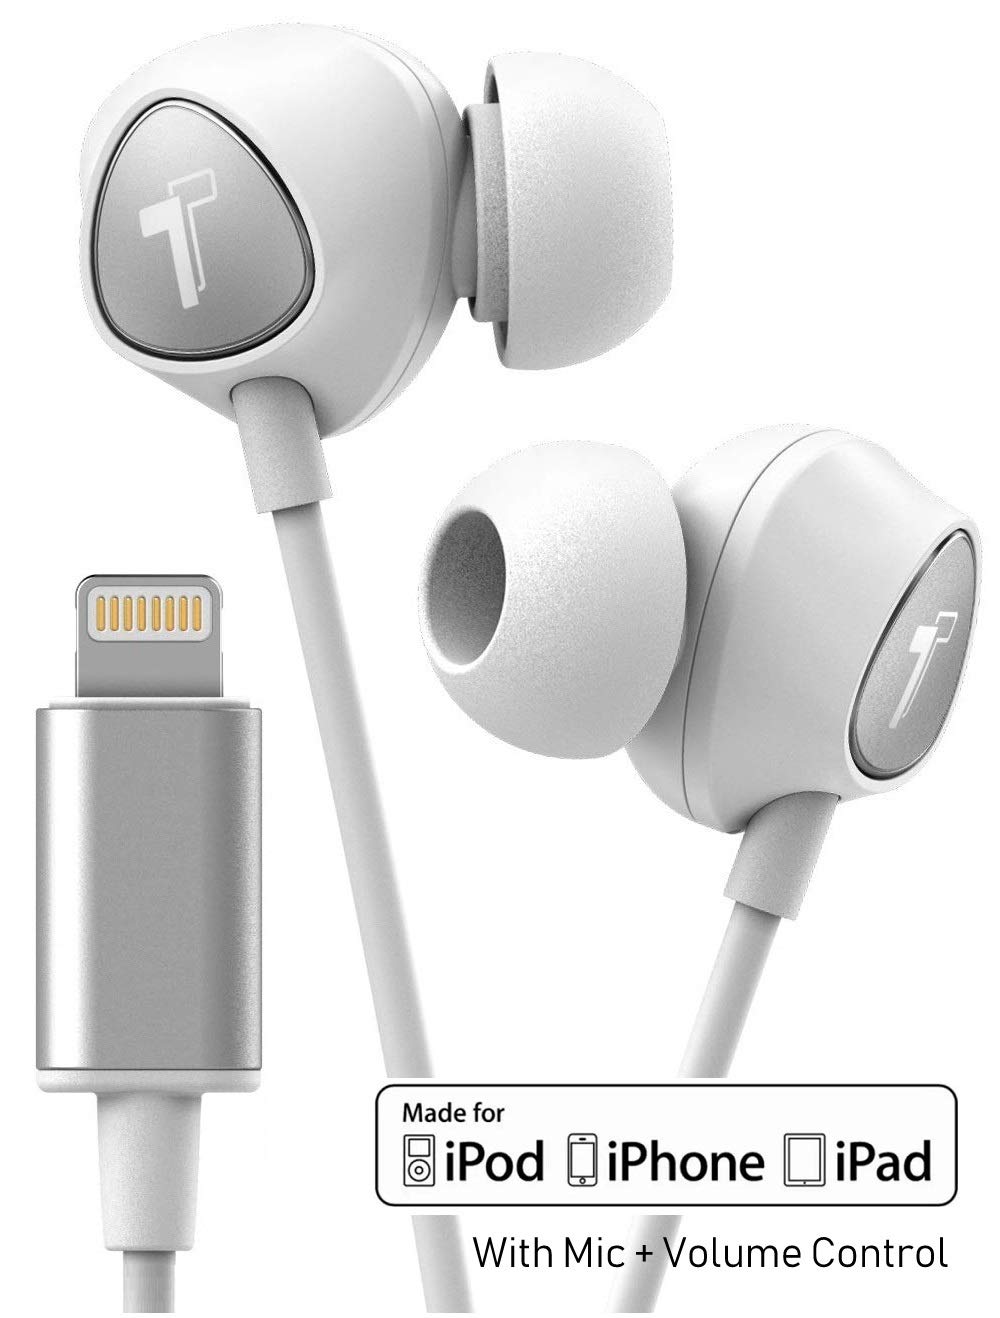 Earphones With Lightning Connector - EarPods with Lightning Connectorを購入 - Apple（日本） - Apple（日本） - The palovue earflow headphones with lightning connector are lightweight headphones that deliver very good sound quality with an immersive listening experience.